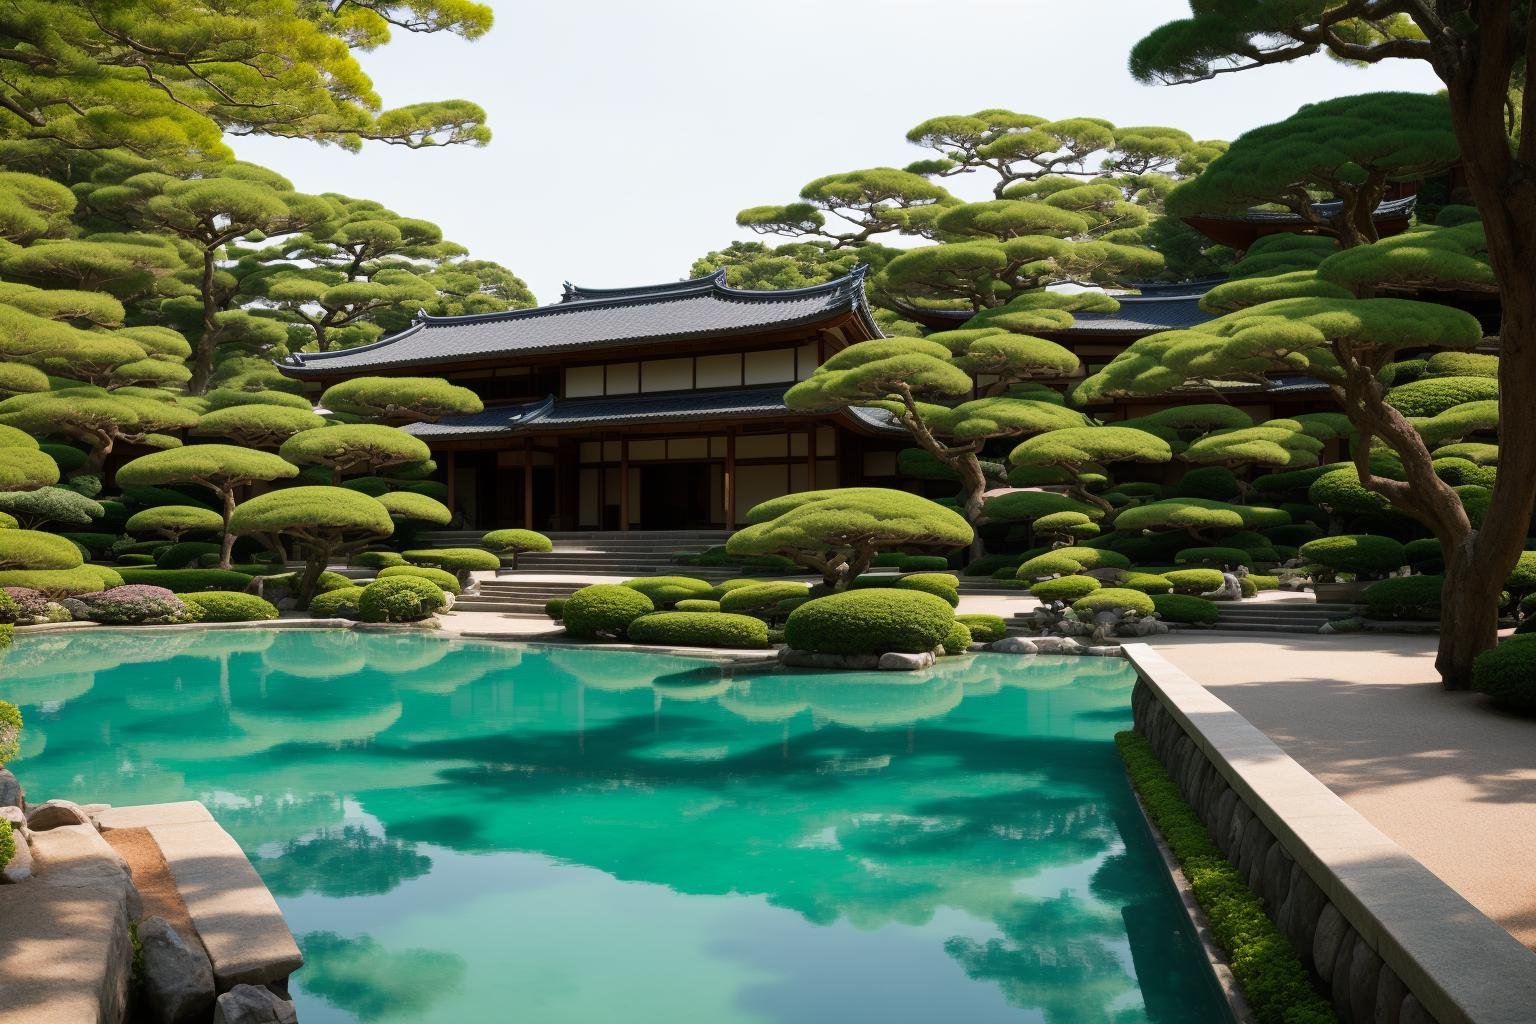 A breathtaking view of the renowned Japanese villa's exterior surrounded by tranquil waters, reflecting its elegance and grandeur. The illustrious villa stands amidst lush greenery, reminiscent of traditional Japanese gardens. The art form chosen for this depiction is photography, captured with a 35mm lens, bringing the exquisite details to life. The color temperature is cool, enhancing the serene ambiance. A subtle smile graces the face of a person standing by, admiring the view. Soft, natural lighting gently illuminates the scene, creating an atmosphere of tranquility and nostalgia